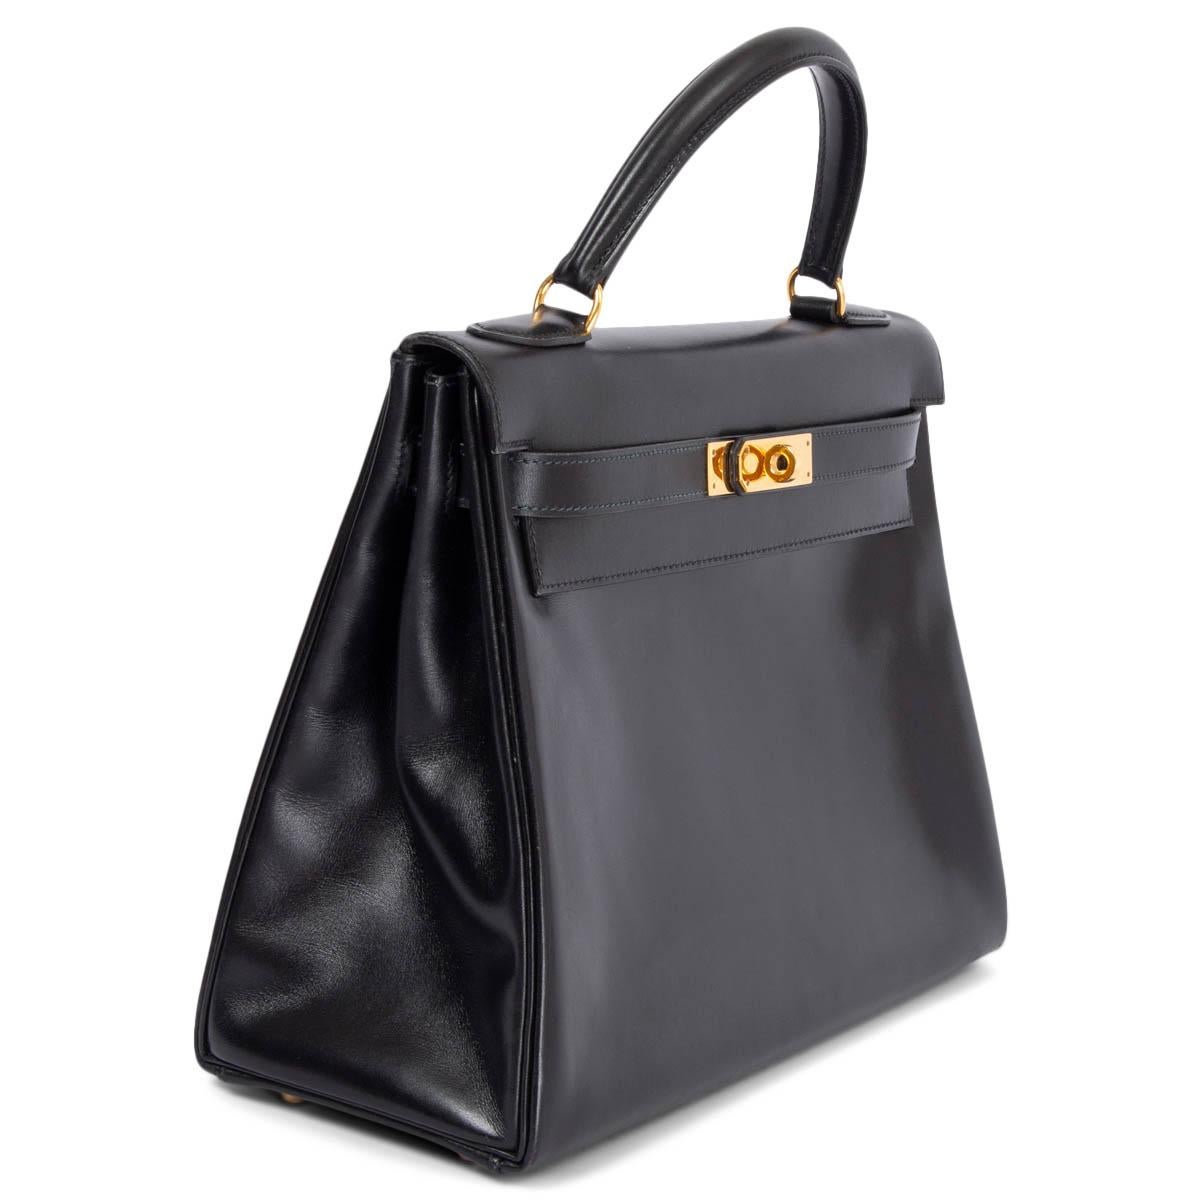 100% authentic Hermès Kelly 32 Retoune bag in black Veau Box leather featuring gold-tone hardware. Lined in Chevre (goat skin) with two open pockets against the front and a zipper pocket against the back. Comes with leather shoulder-strap. Has been